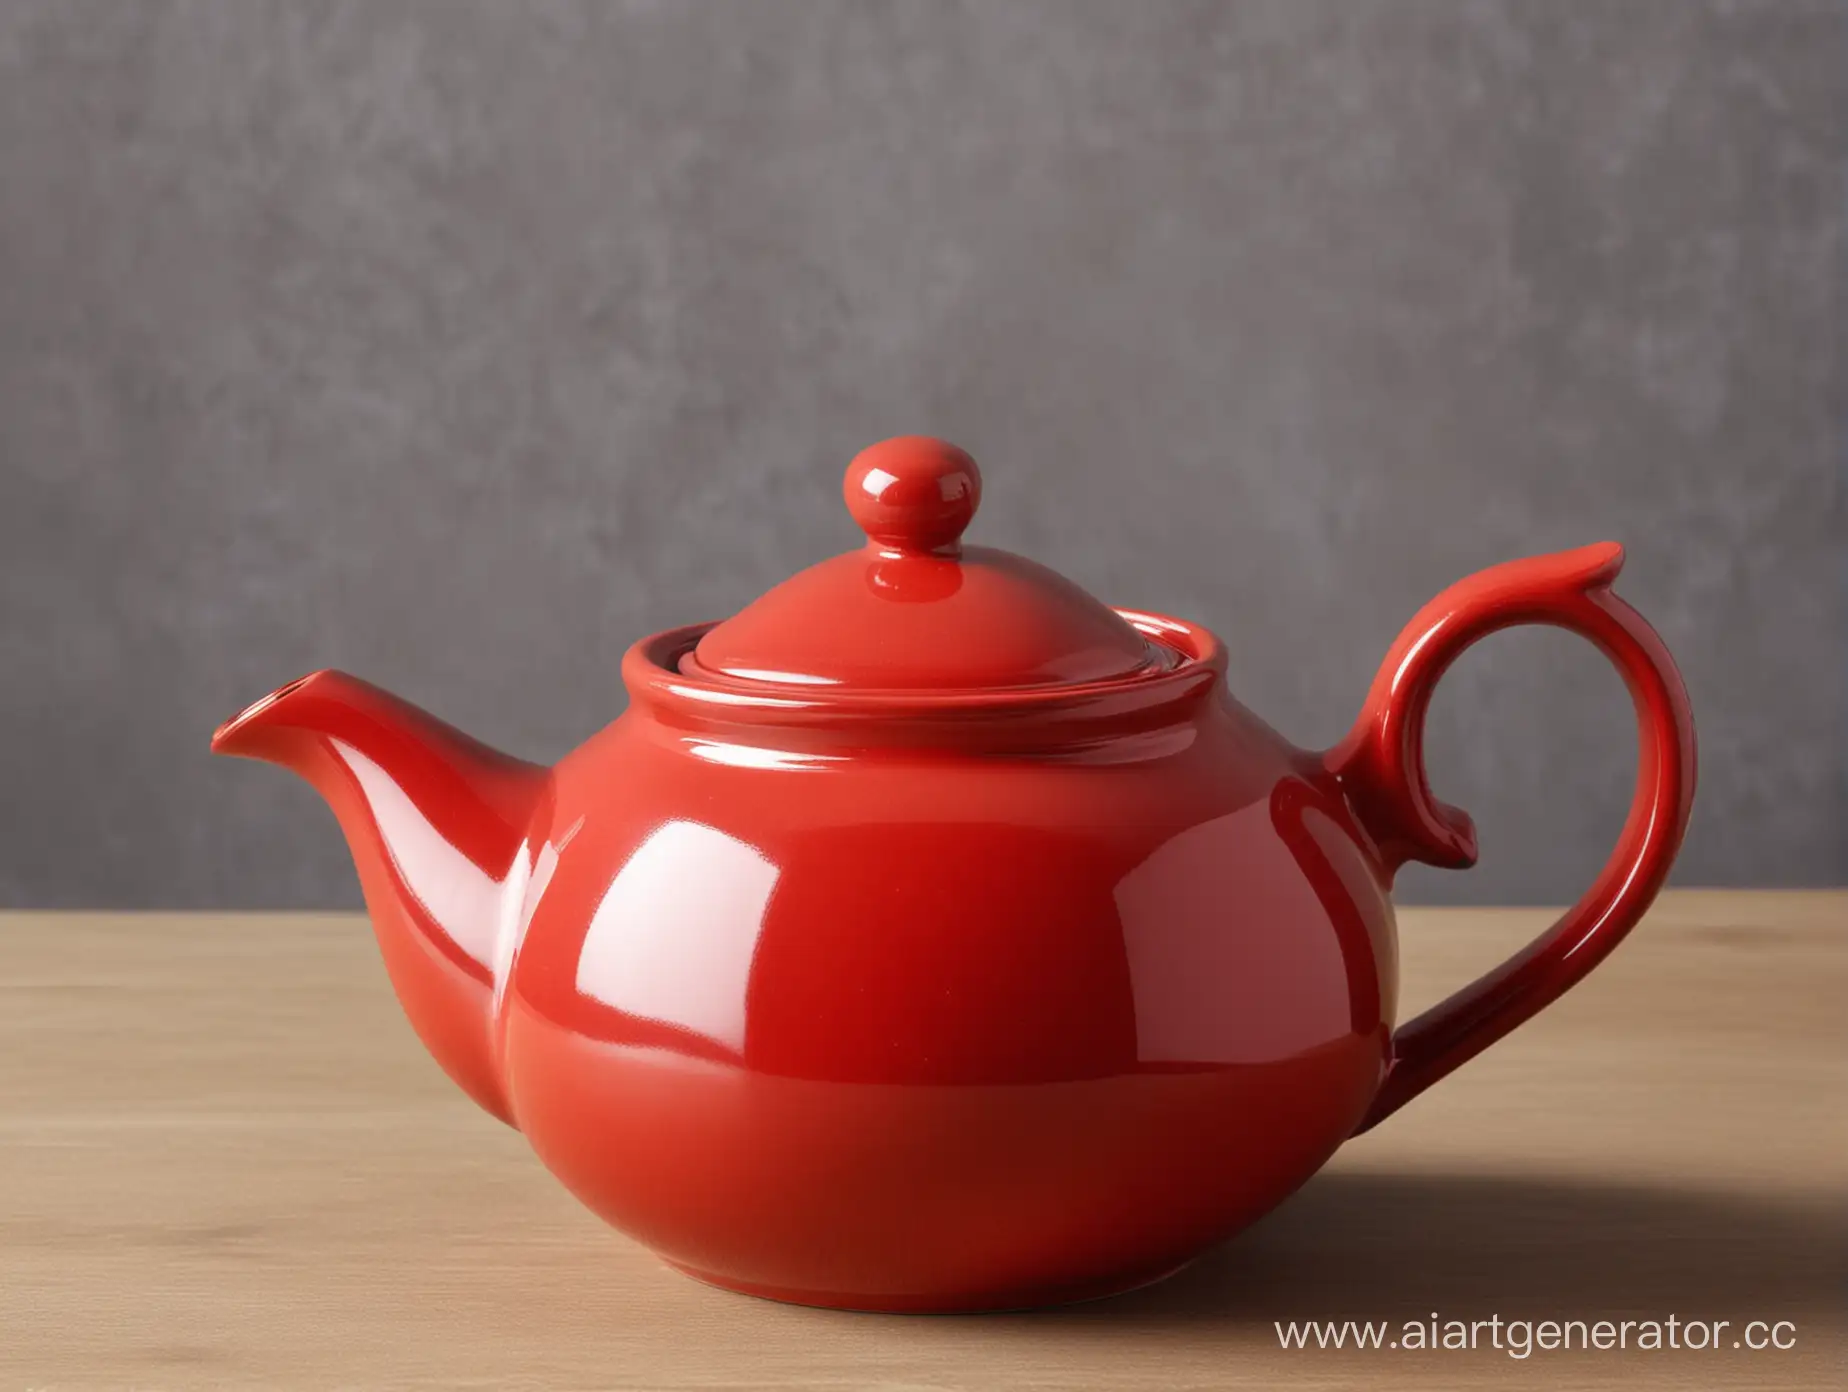 Handcrafted-Red-Ceramic-Teapot-with-Intricate-Design